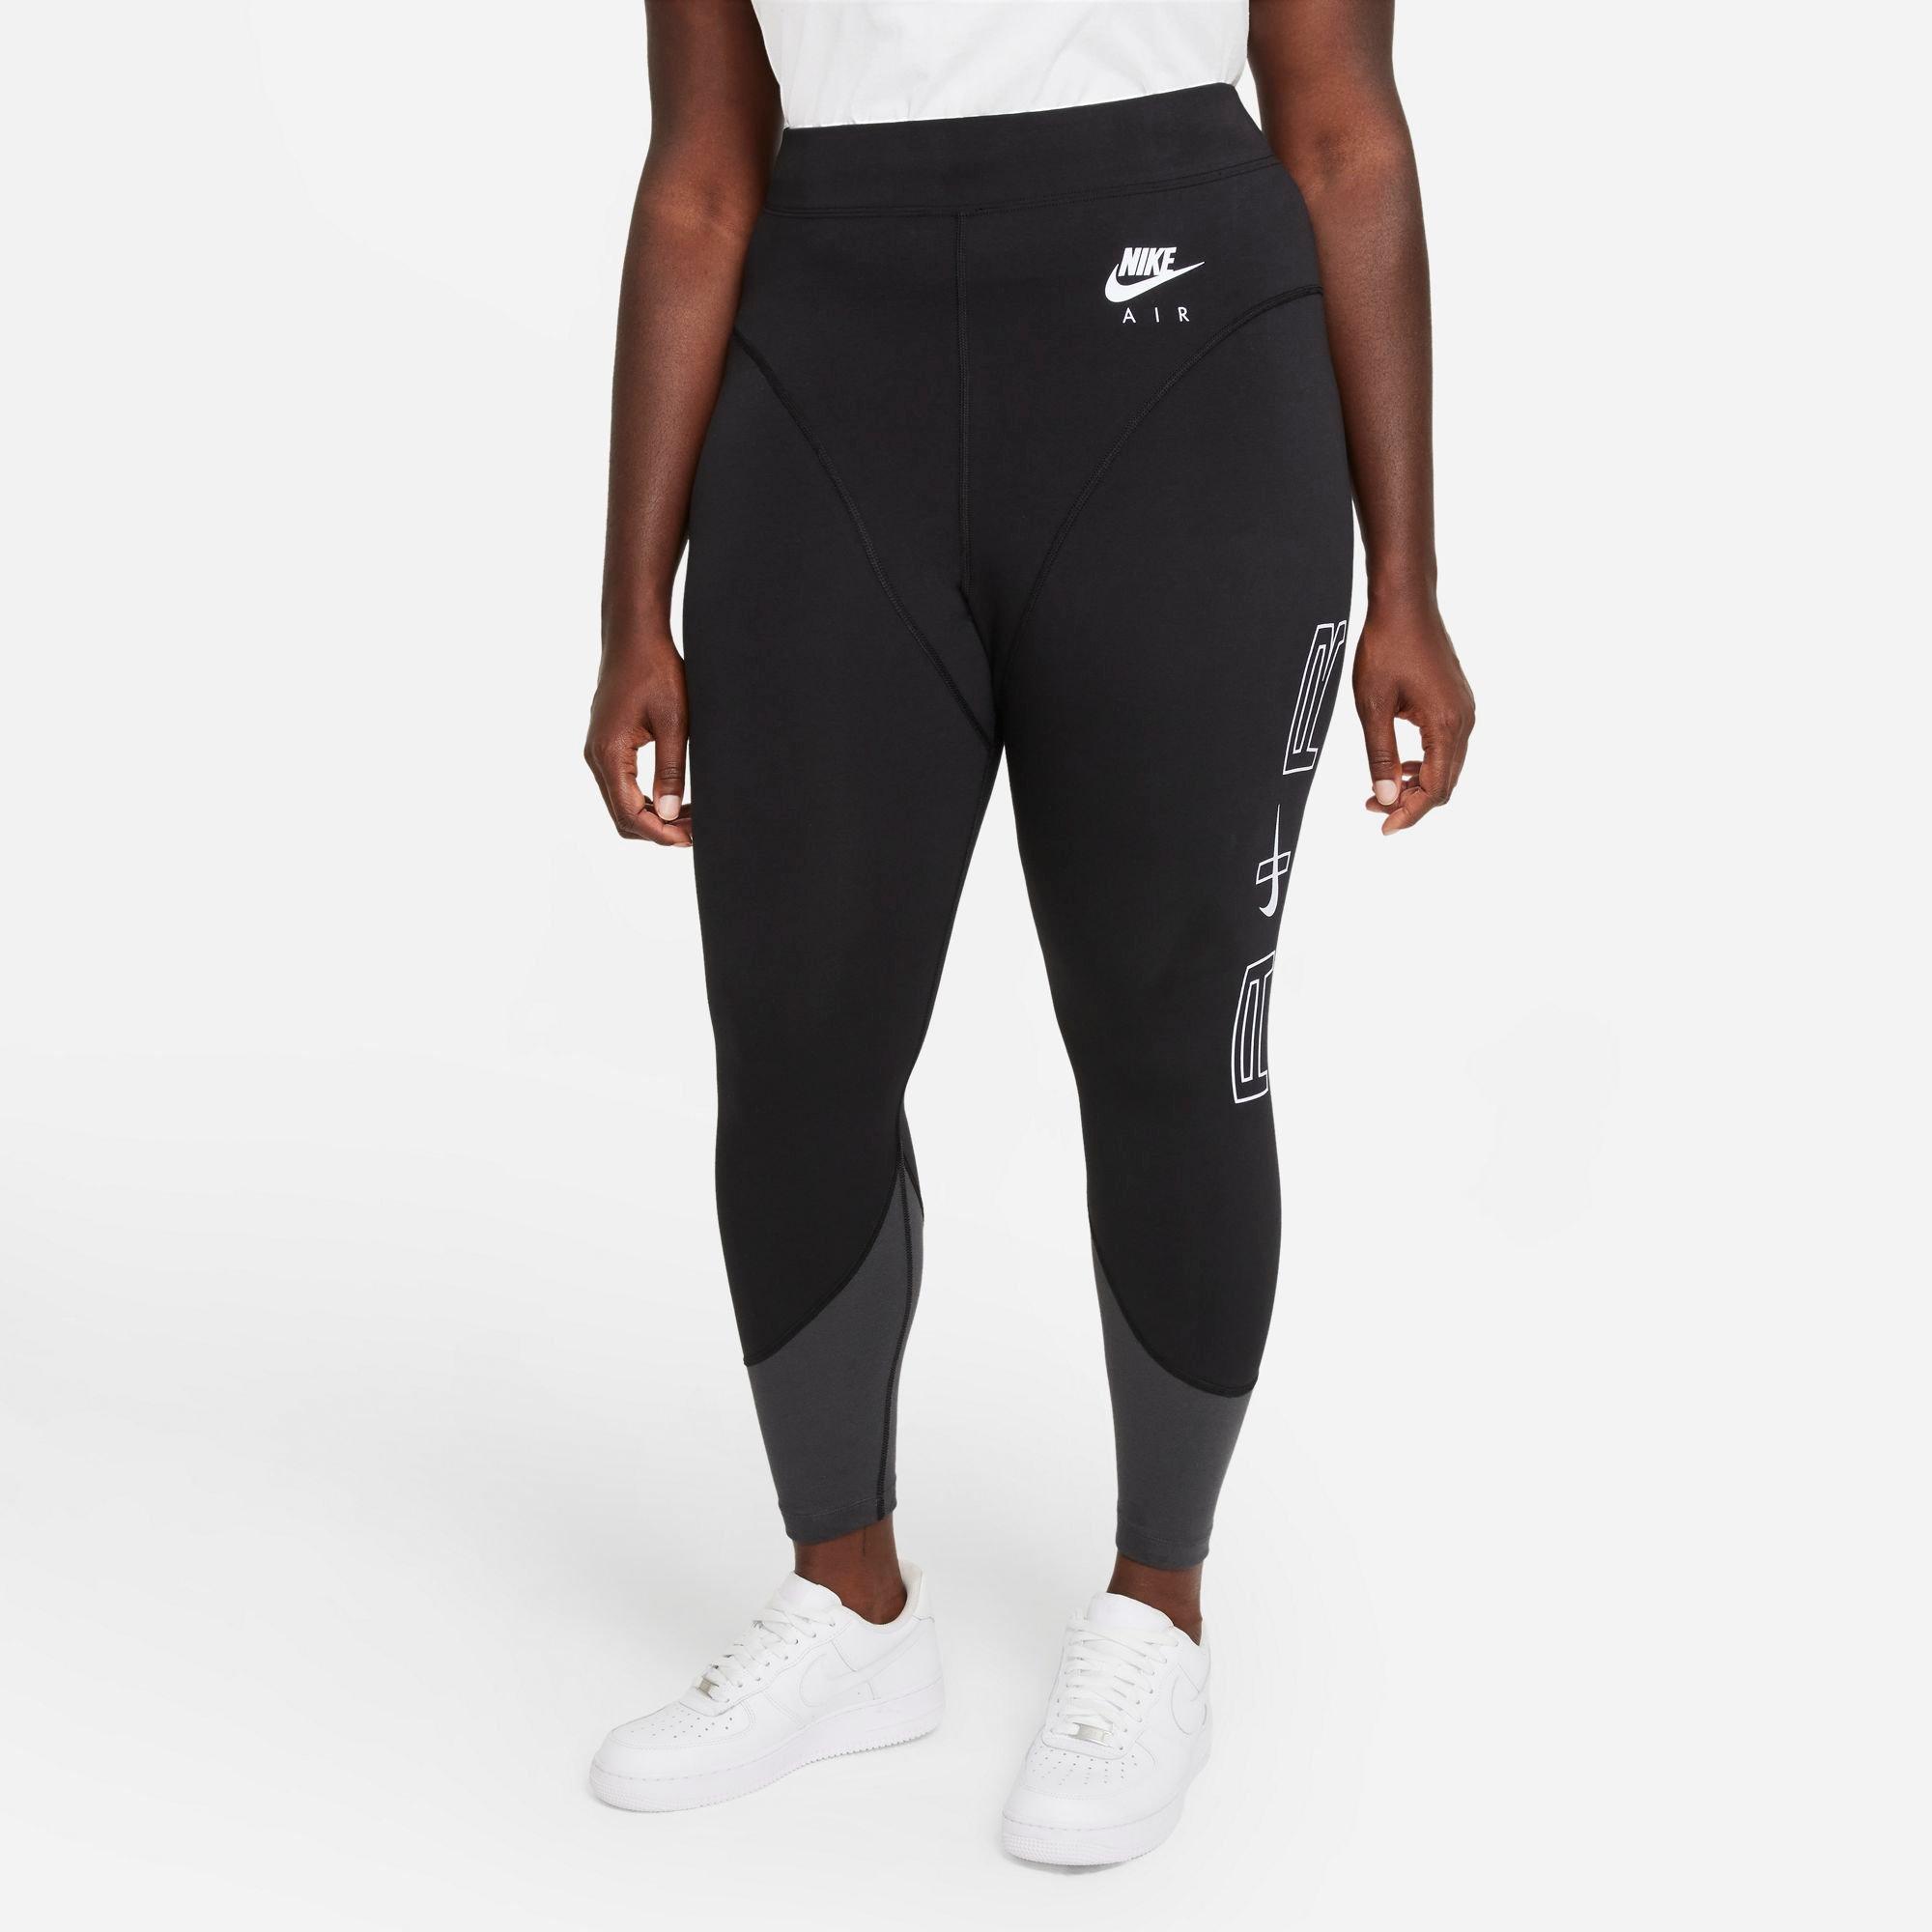 Total Knockout Chill High Waist Active Pocket Legging